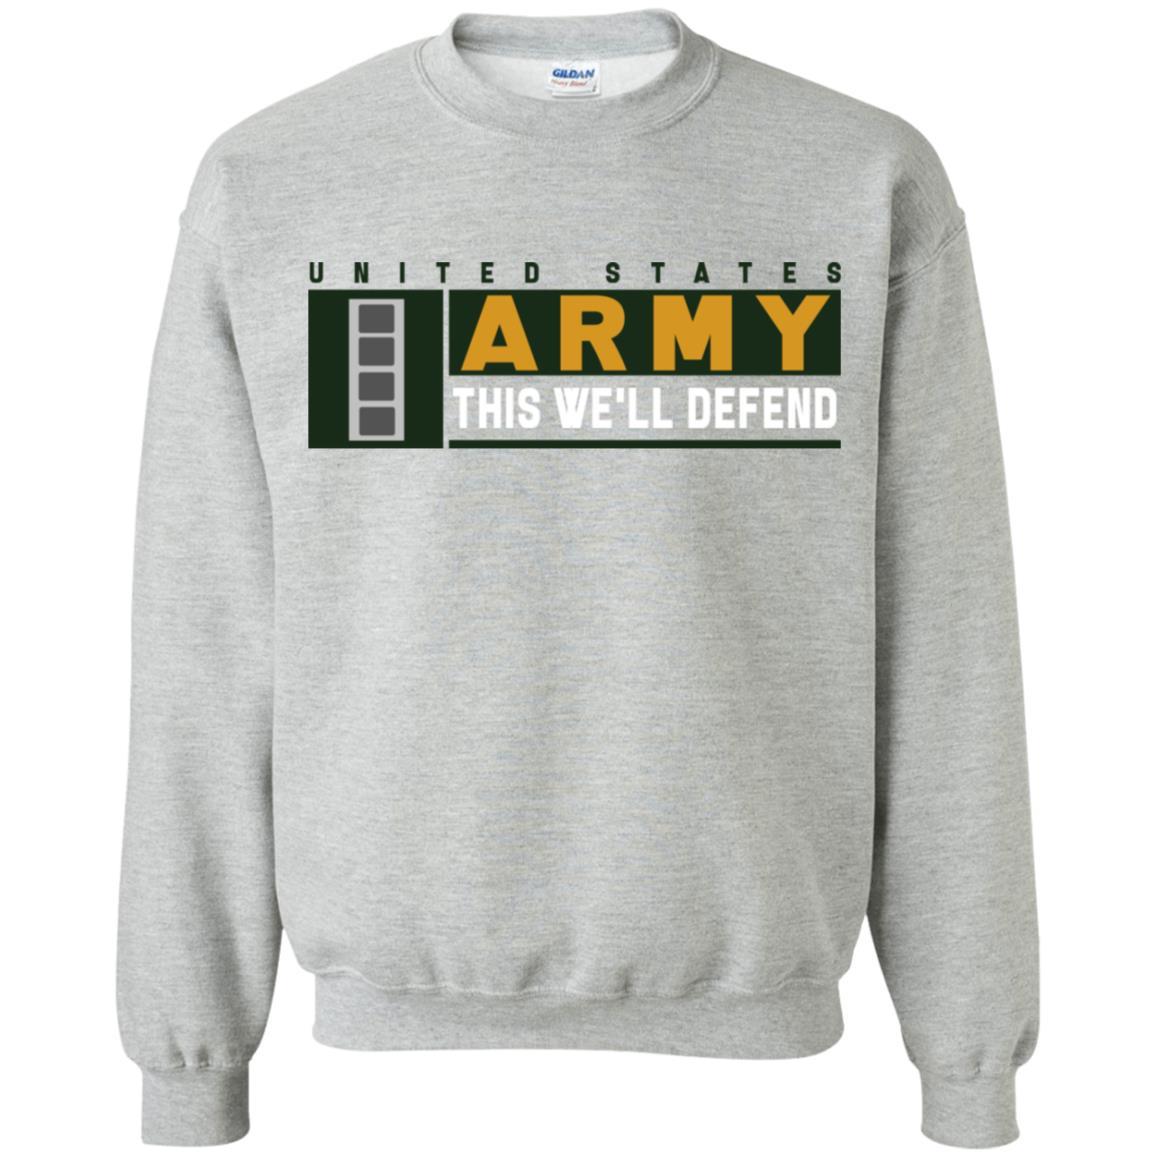 US Army W-4 This We Will Defend Long Sleeve - Pullover Hoodie-TShirt-Army-Veterans Nation